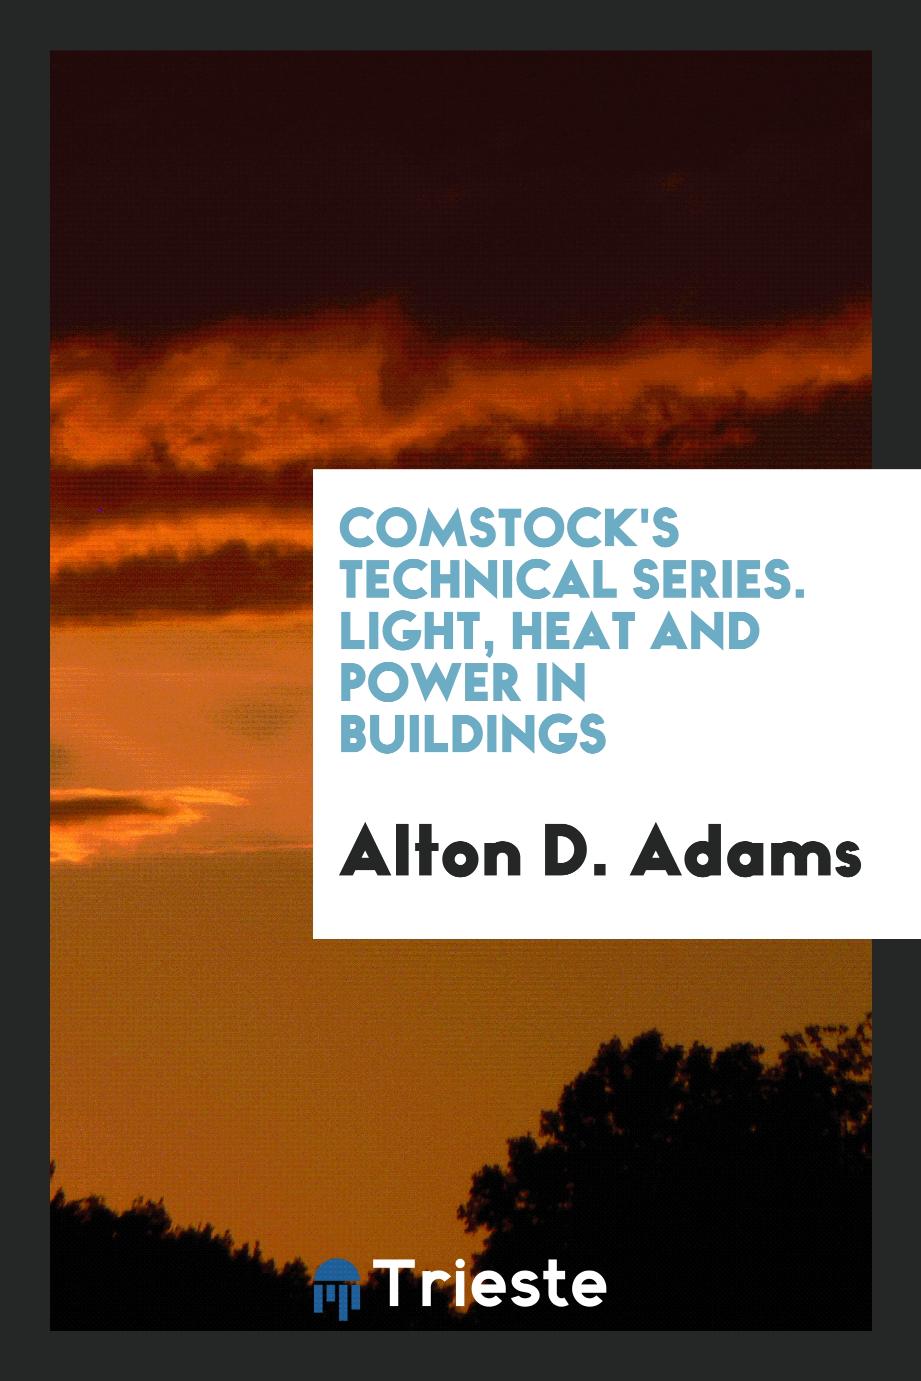 Comstock's Technical Series. Light, Heat and Power in Buildings